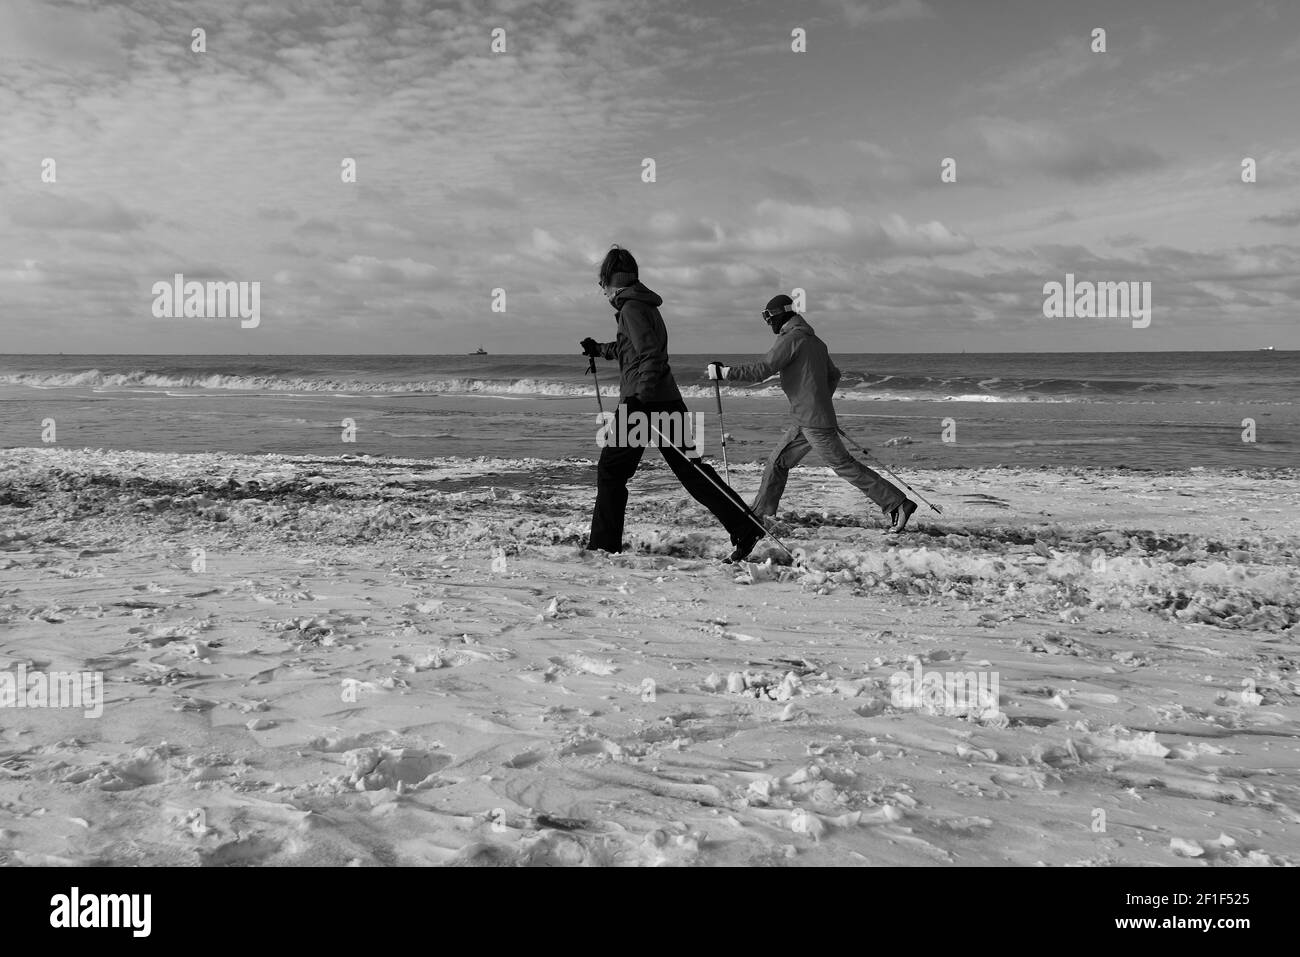 Two people ski on the beach after heavy snowfall in the country. Stock Photo